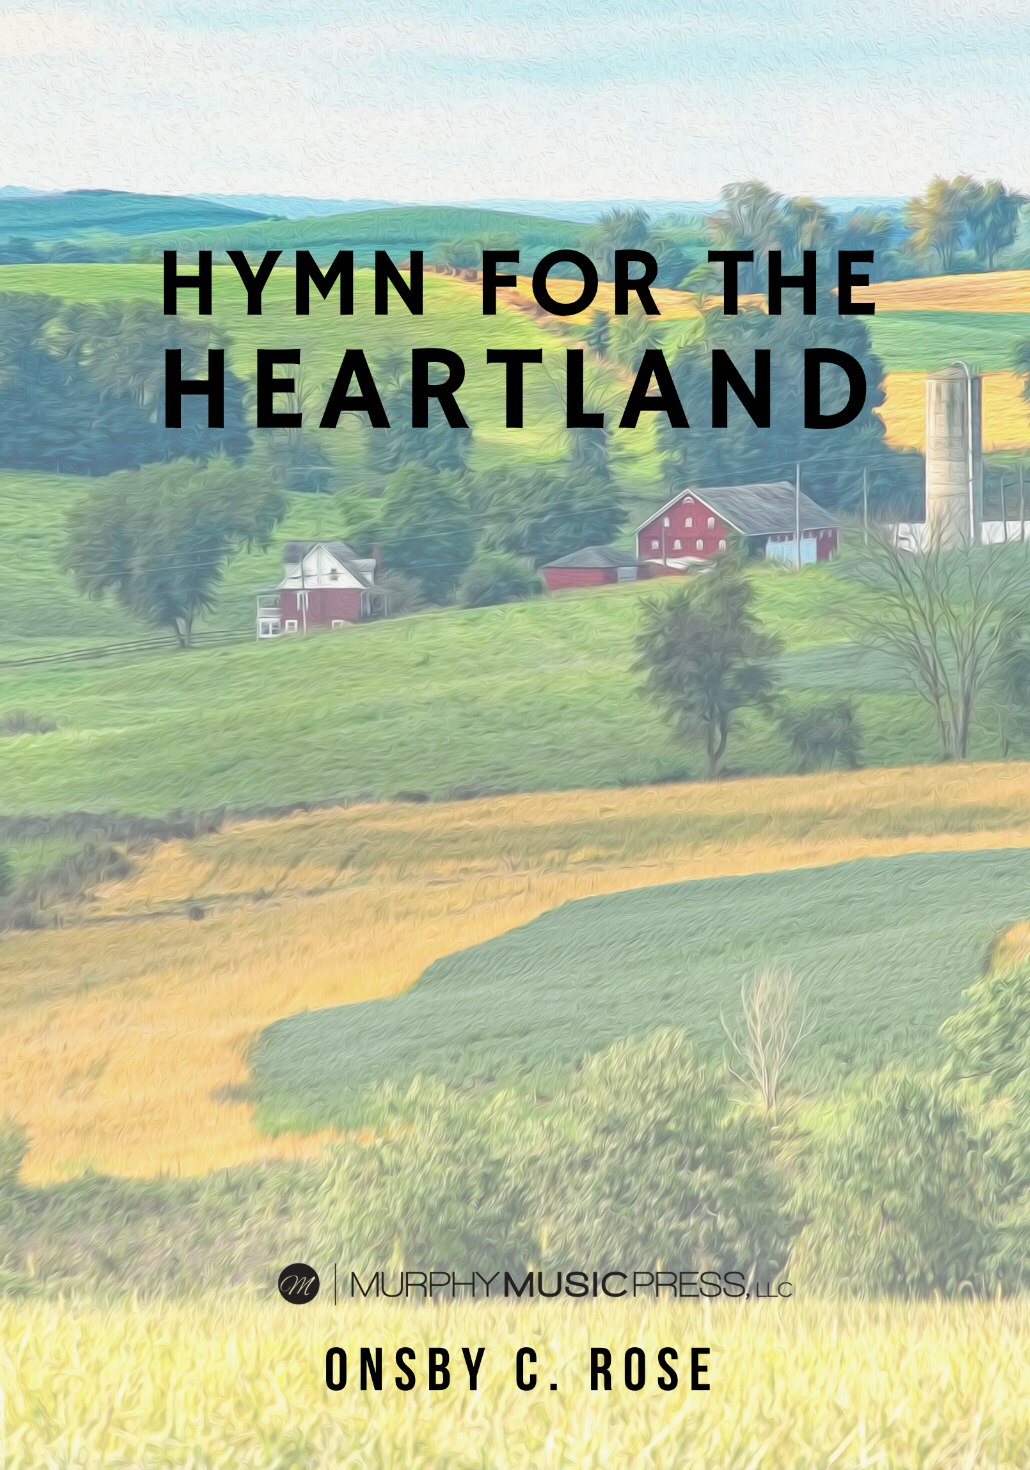 Hymn For The Heartland (Score Only) by Onsby C. Rose